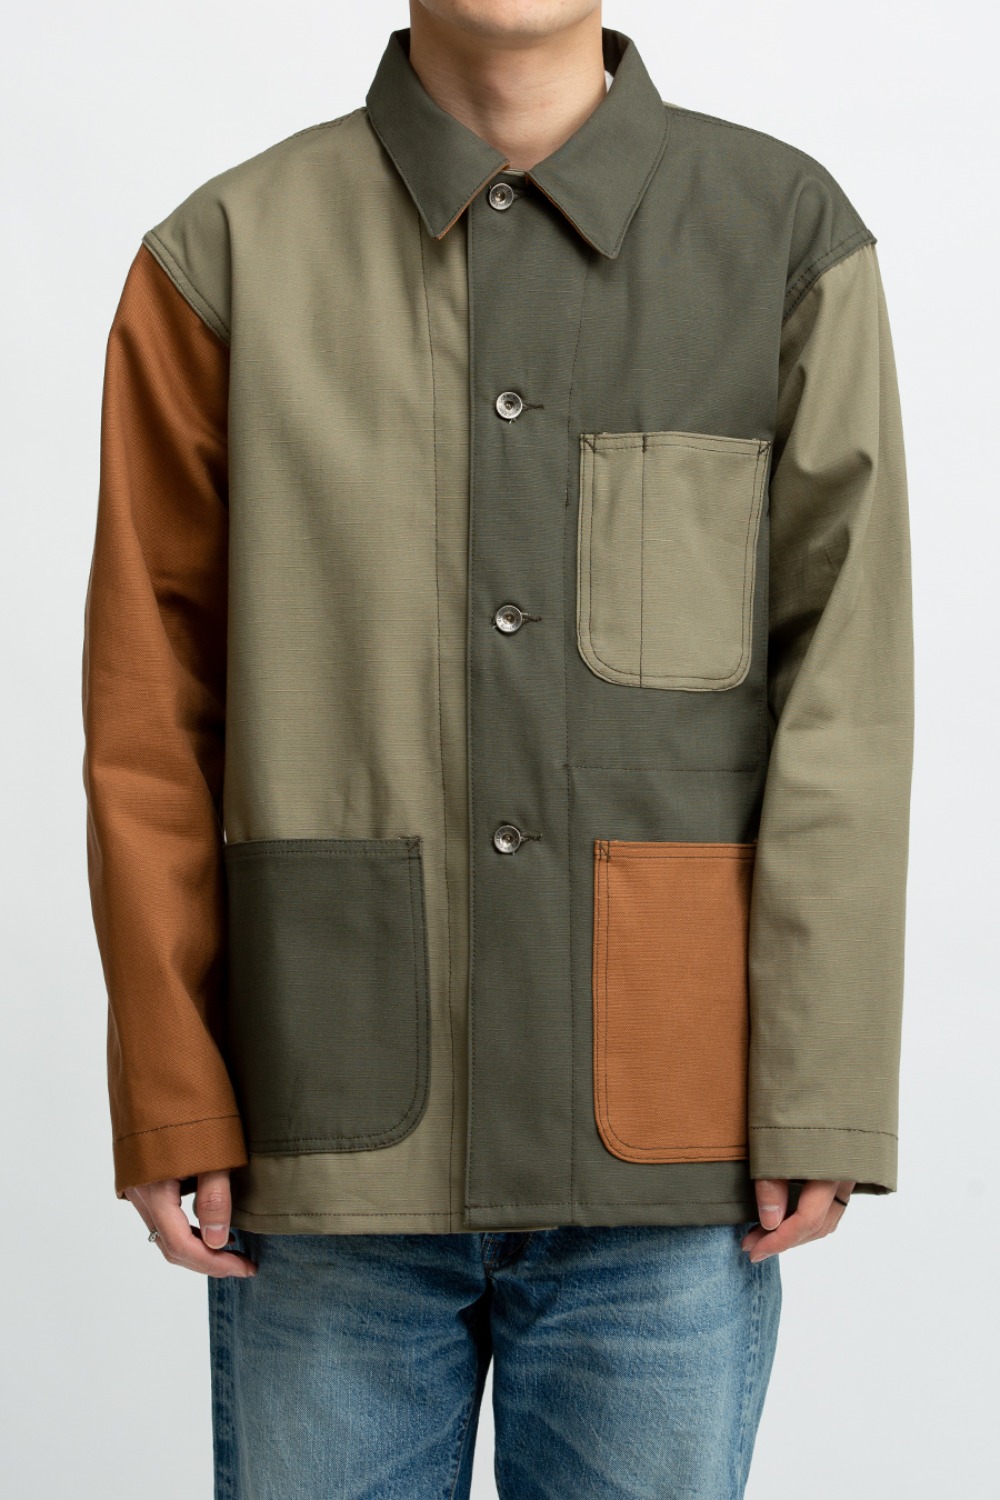 UTILITY JACKET COMBO OLIVE COTTON RIPSTOP